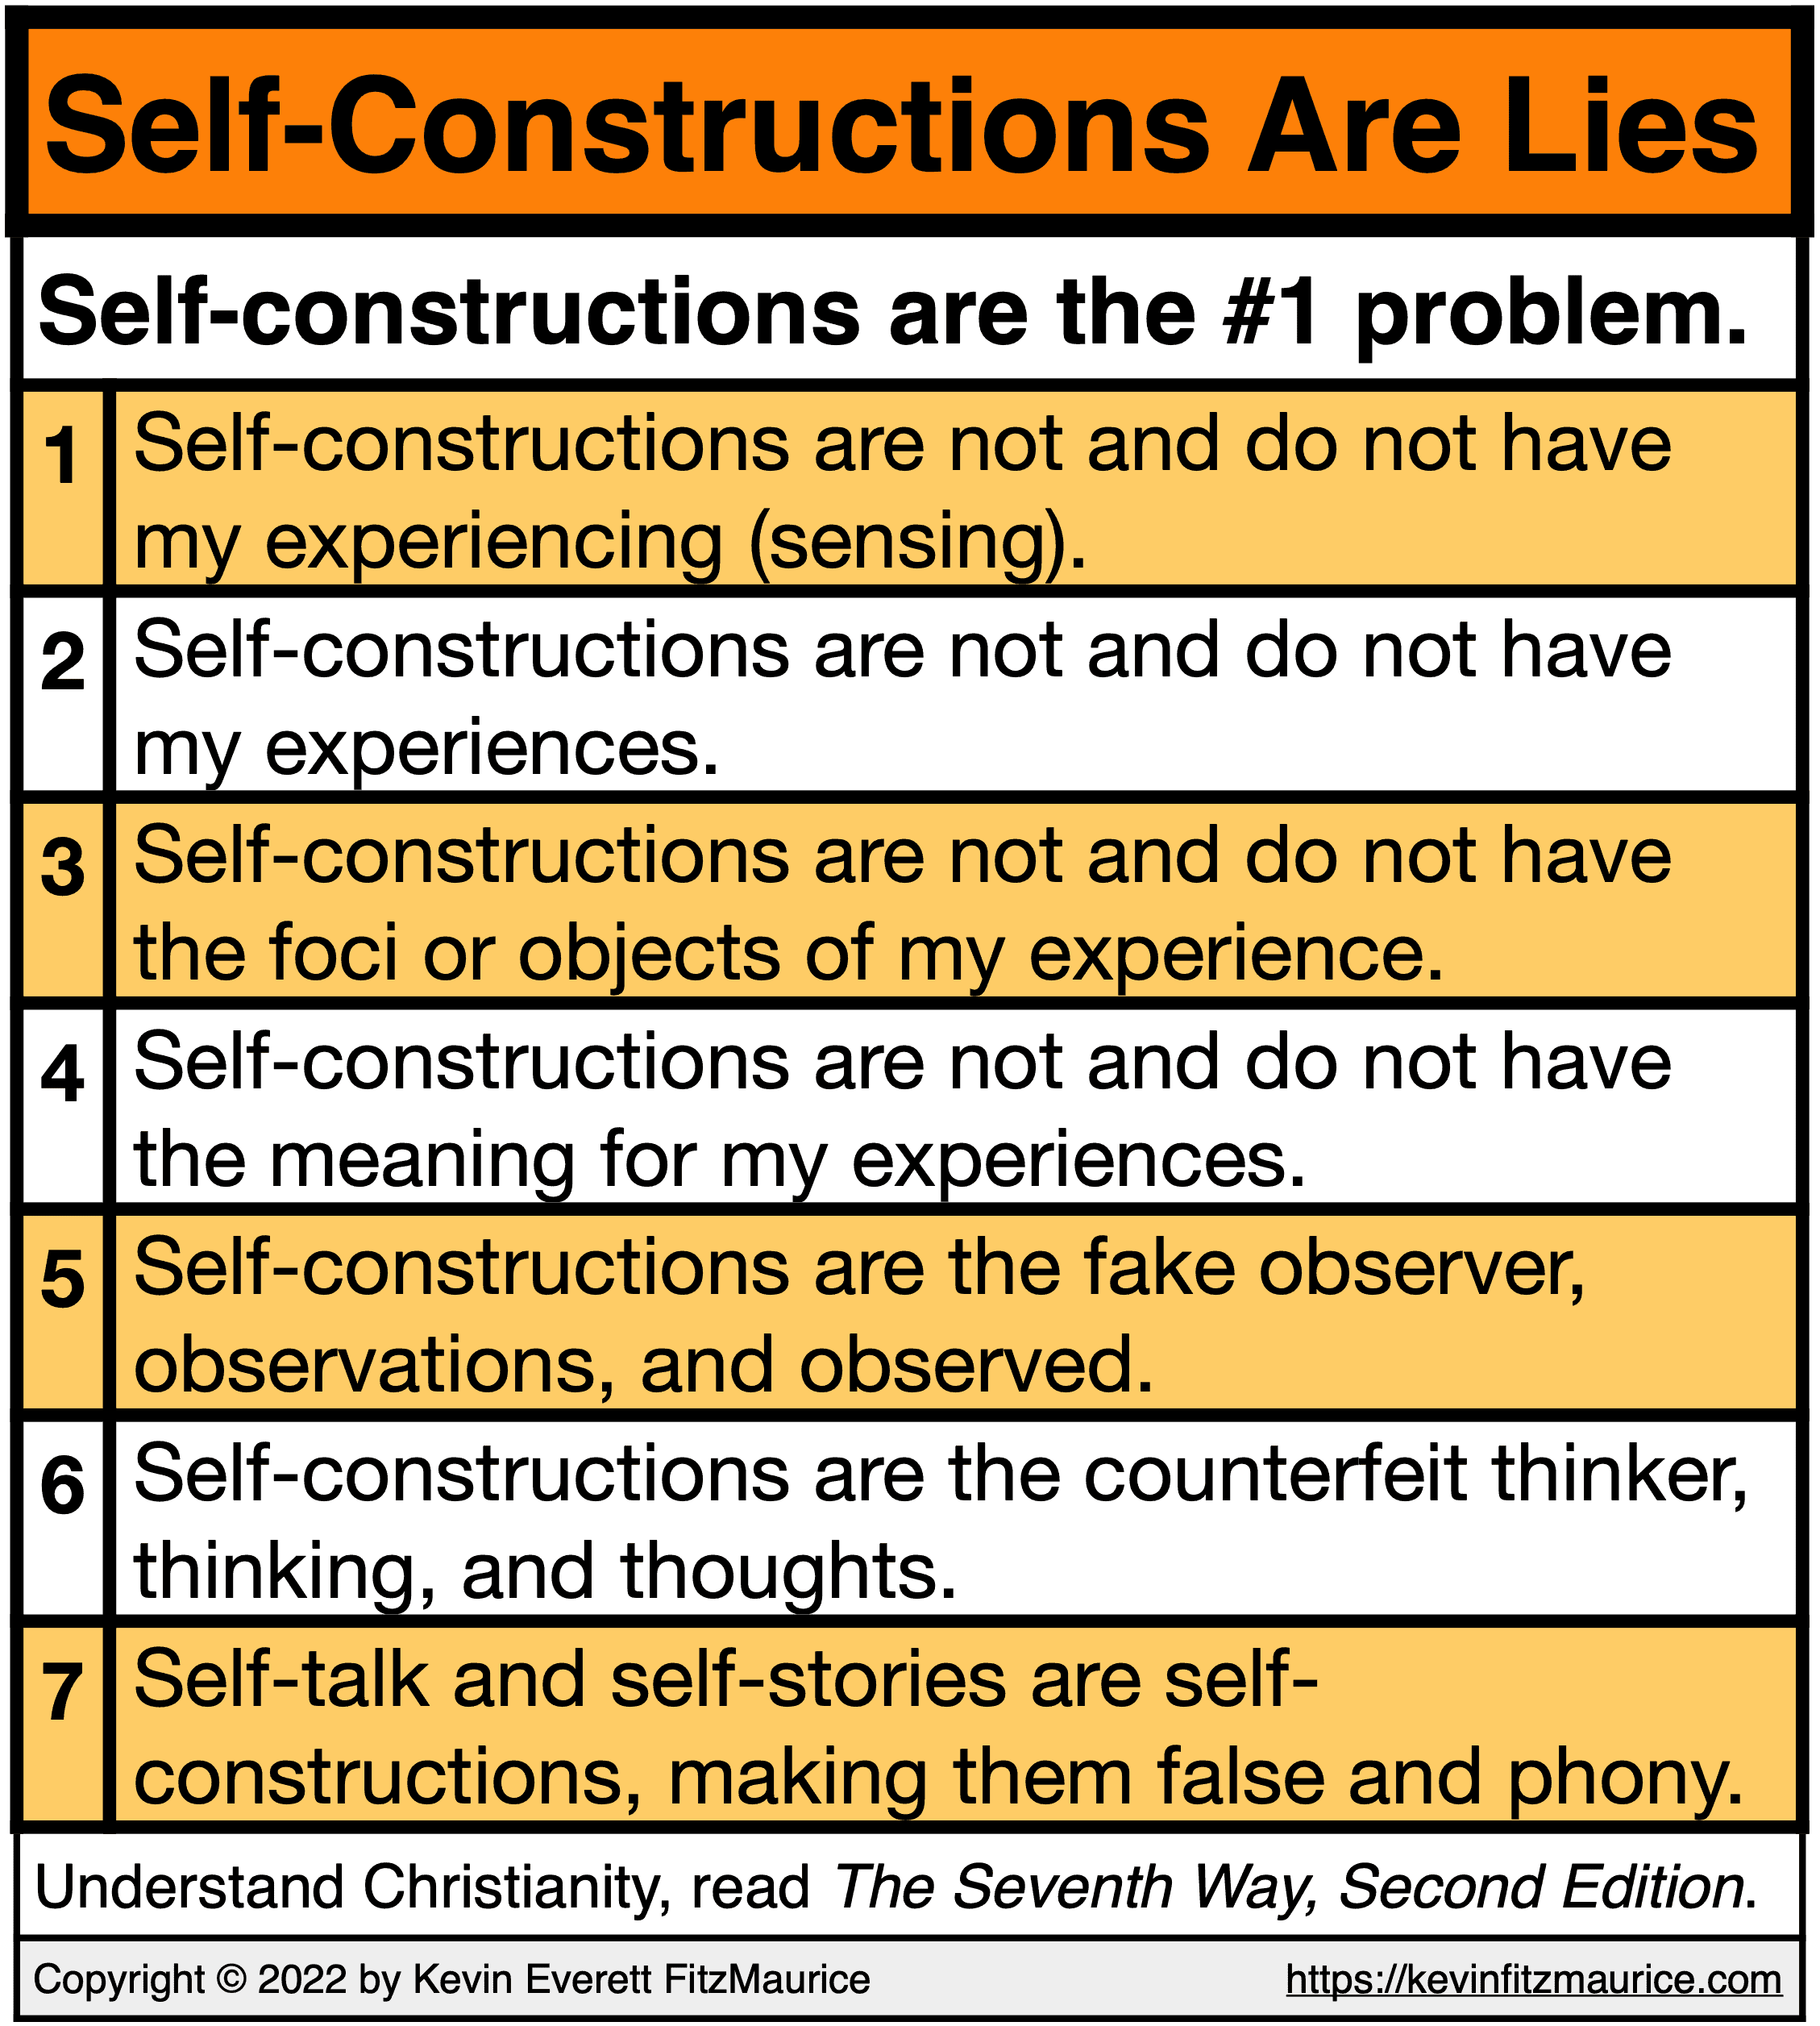 Self-Constructions Are Lies